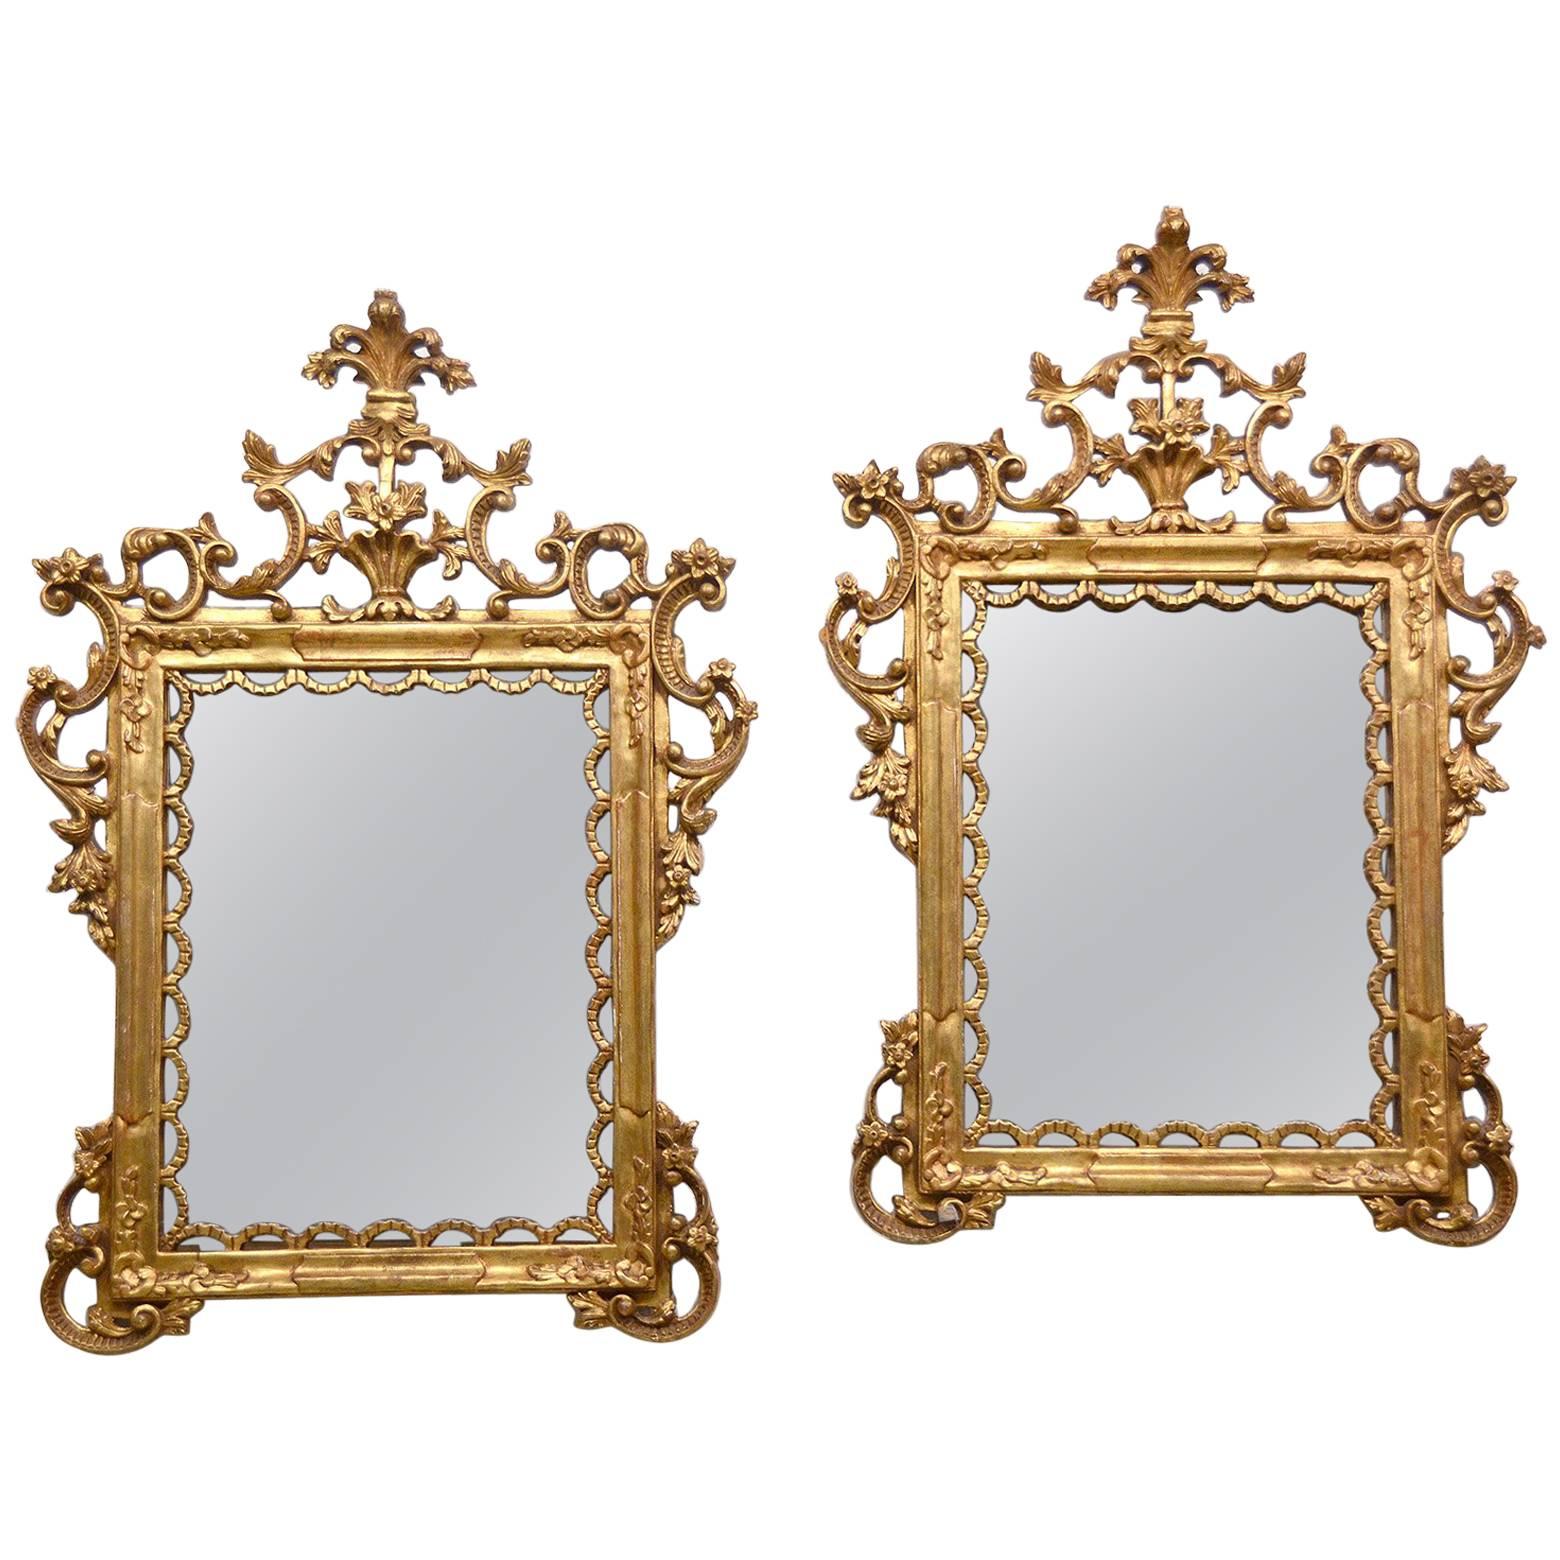 Pair of Carved Gilt Wood Italian Baroque Style Mirrors